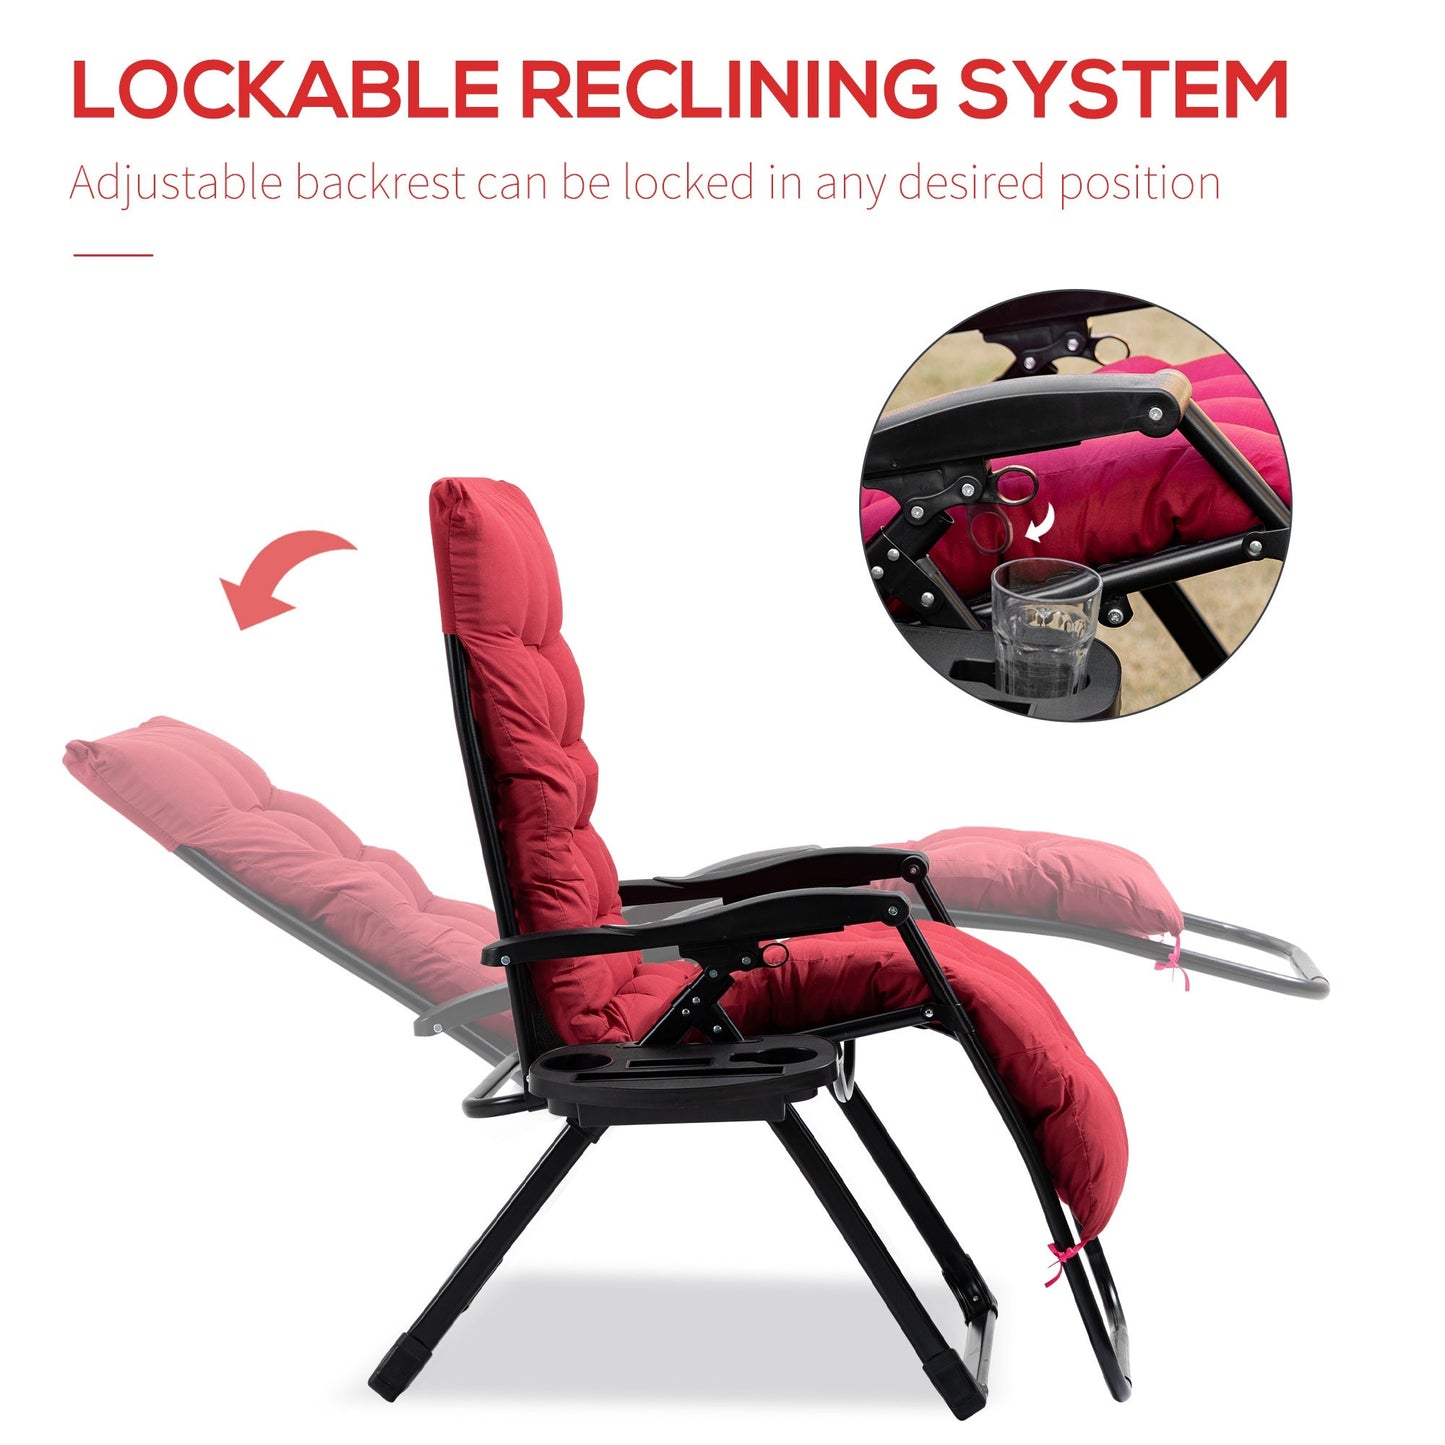 -Outsunny Padded Zero Gravity Chair, Folding Recliner Chair with Cup Holder Cushion, Red - Outdoor Style Company